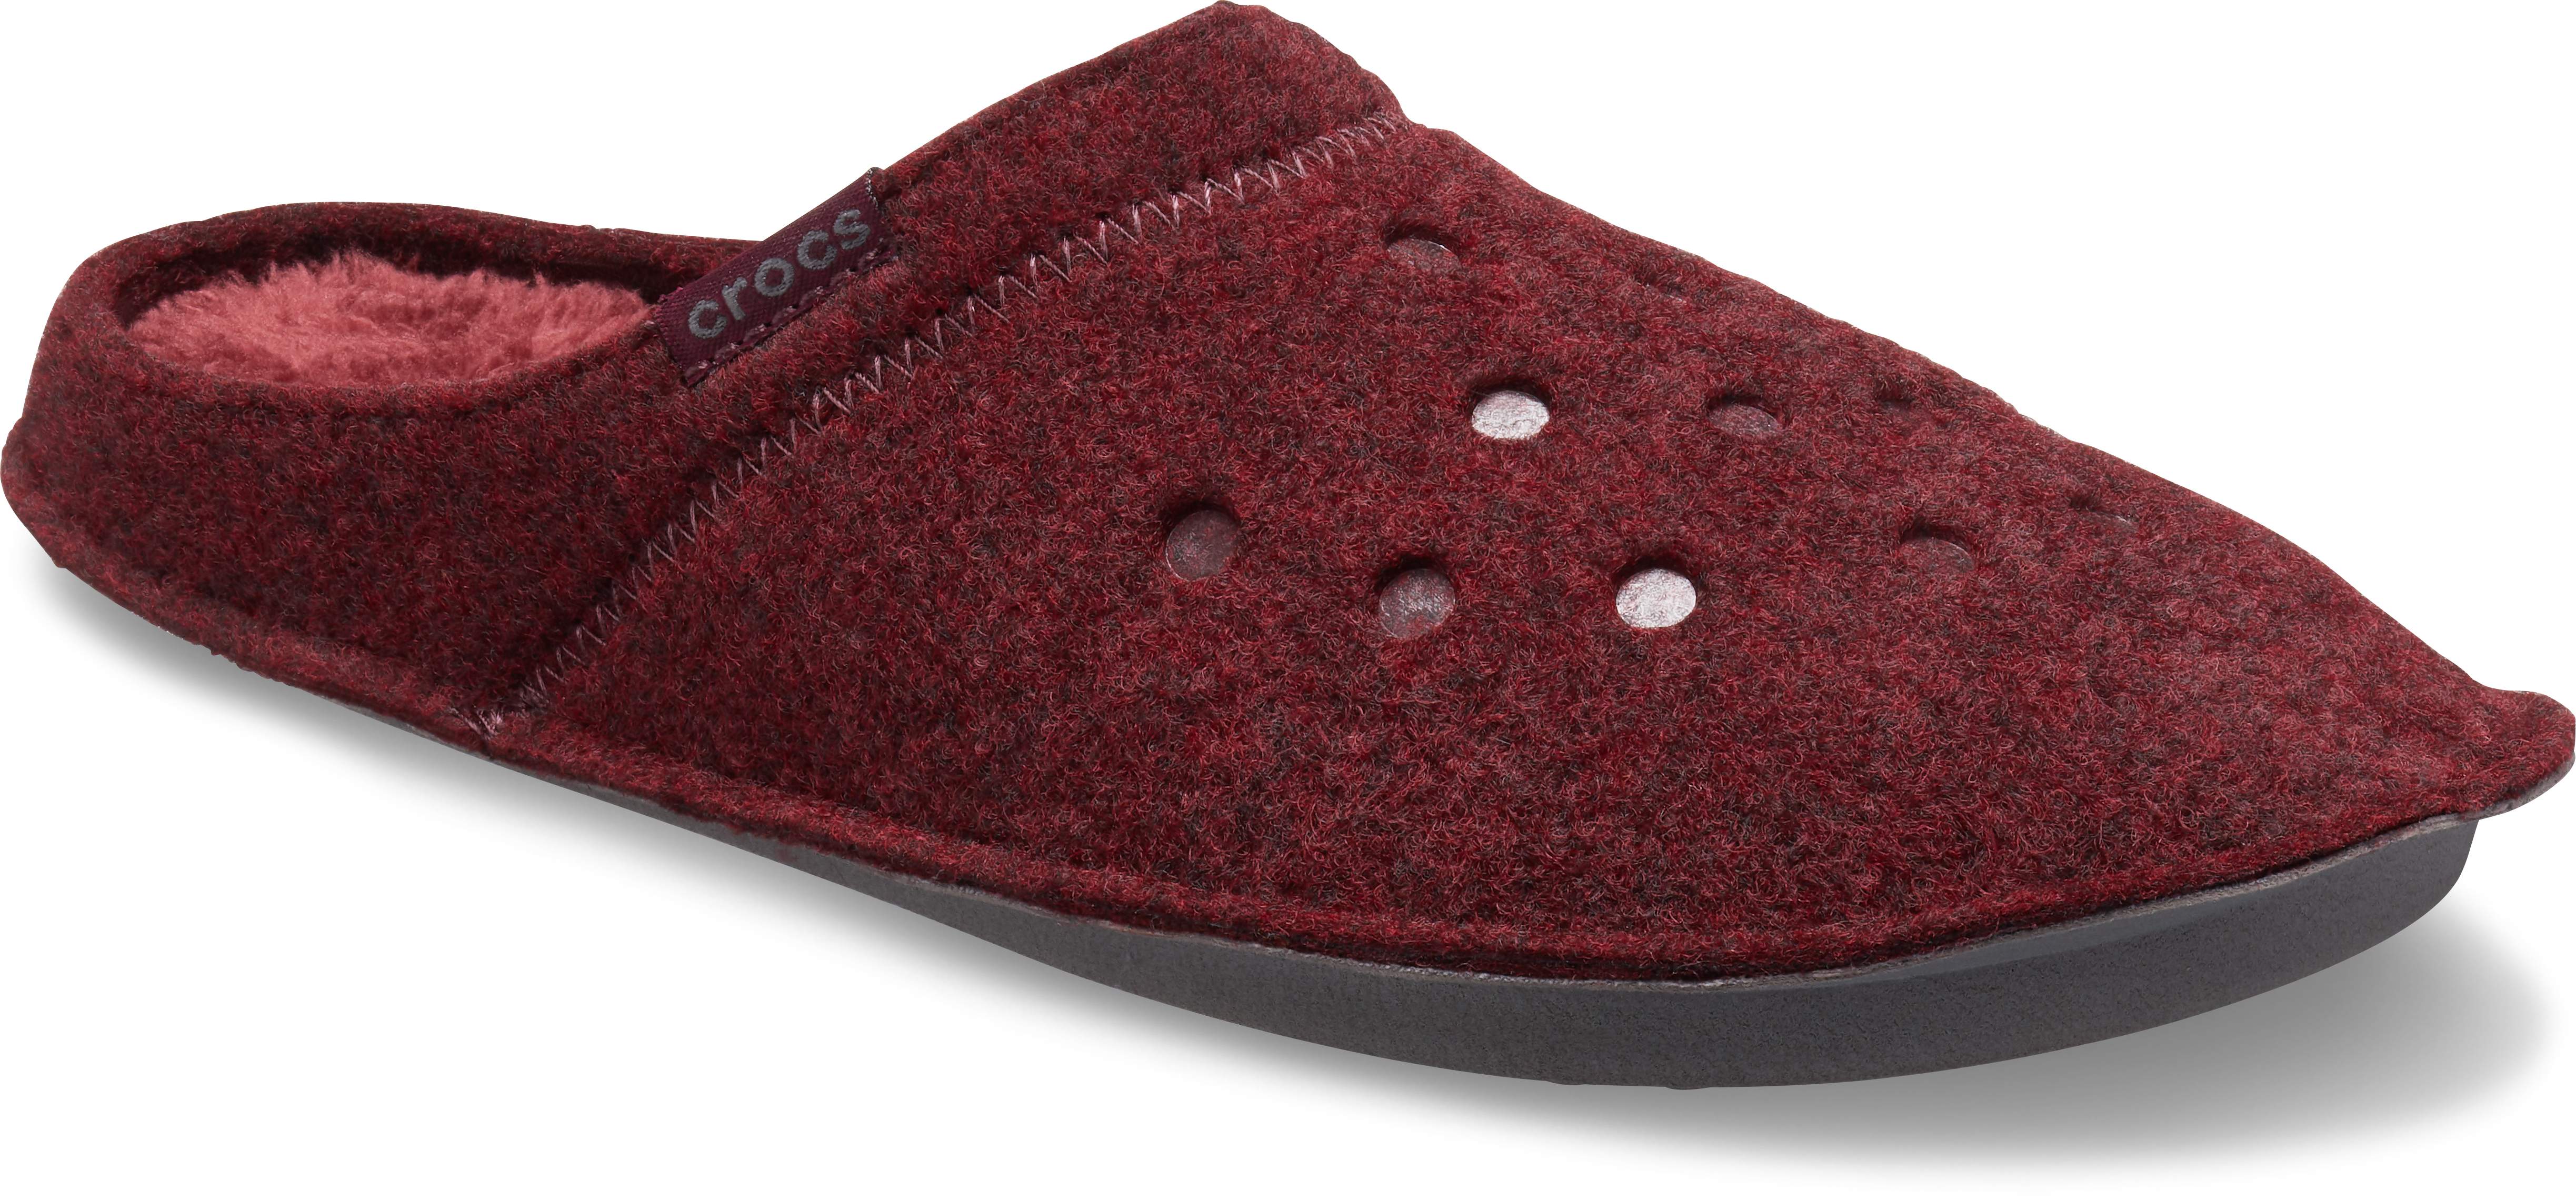 croc style slippers